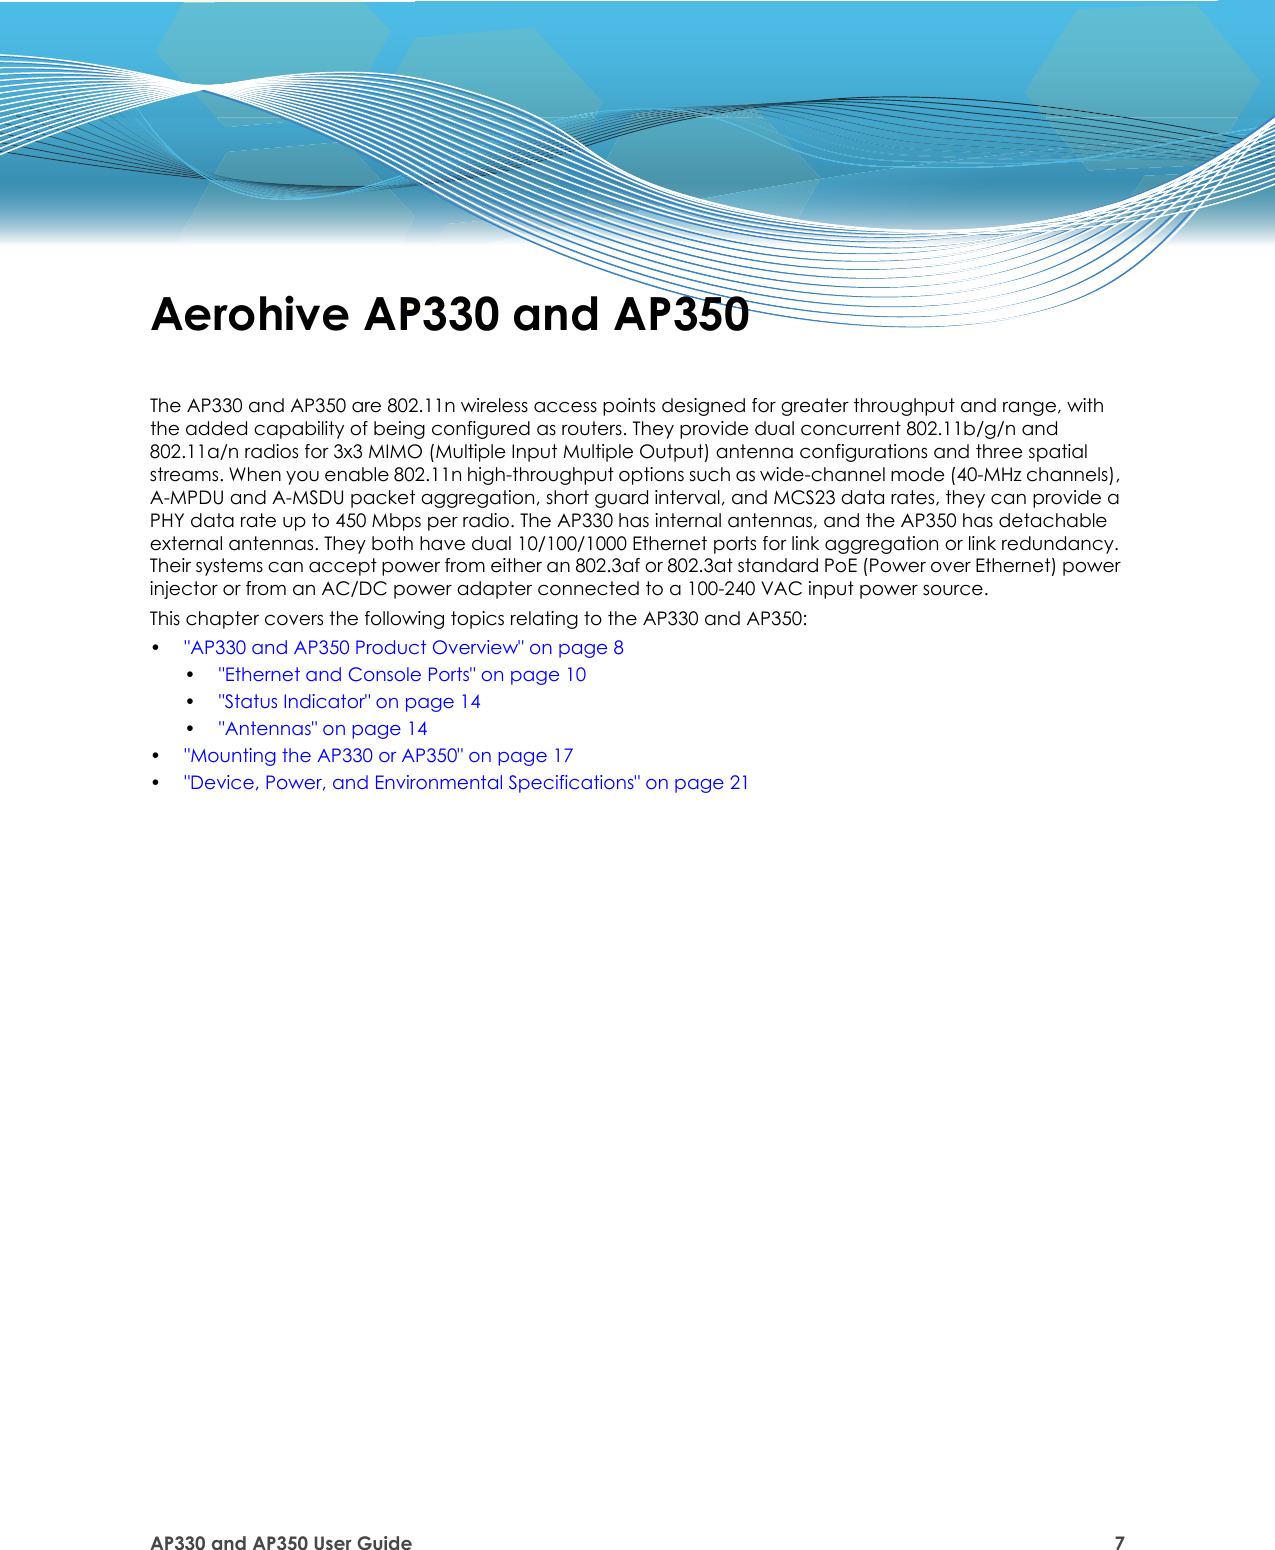 AP330 and AP350 User Guide 7Aerohive AP330 and AP350The AP330 and AP350 are 802.11n wireless access points designed for greater throughput and range, with the added capability of being configured as routers. They provide dual concurrent 802.11b/g/n and 802.11a/n radios for 3x3 MIMO (Multiple Input Multiple Output) antenna configurations and three spatial streams. When you enable 802.11n high-throughput options such as wide-channel mode (40-MHz channels), A-MPDU and A-MSDU packet aggregation, short guard interval, and MCS23 data rates, they can provide a PHY data rate up to 450 Mbps per radio. The AP330 has internal antennas, and the AP350 has detachable external antennas. They both have dual 10/100/1000 Ethernet ports for link aggregation or link redundancy. Their systems can accept power from either an 802.3af or 802.3at standard PoE (Power over Ethernet) power injector or from an AC/DC power adapter connected to a 100-240 VAC input power source. This chapter covers the following topics relating to the AP330 and AP350:•&quot;AP330 and AP350 Product Overview&quot; on page 8•&quot;Ethernet and Console Ports&quot; on page 10•&quot;Status Indicator&quot; on page 14•&quot;Antennas&quot; on page 14•&quot;Mounting the AP330 or AP350&quot; on page 17•&quot;Device, Power, and Environmental Specifications&quot; on page 21